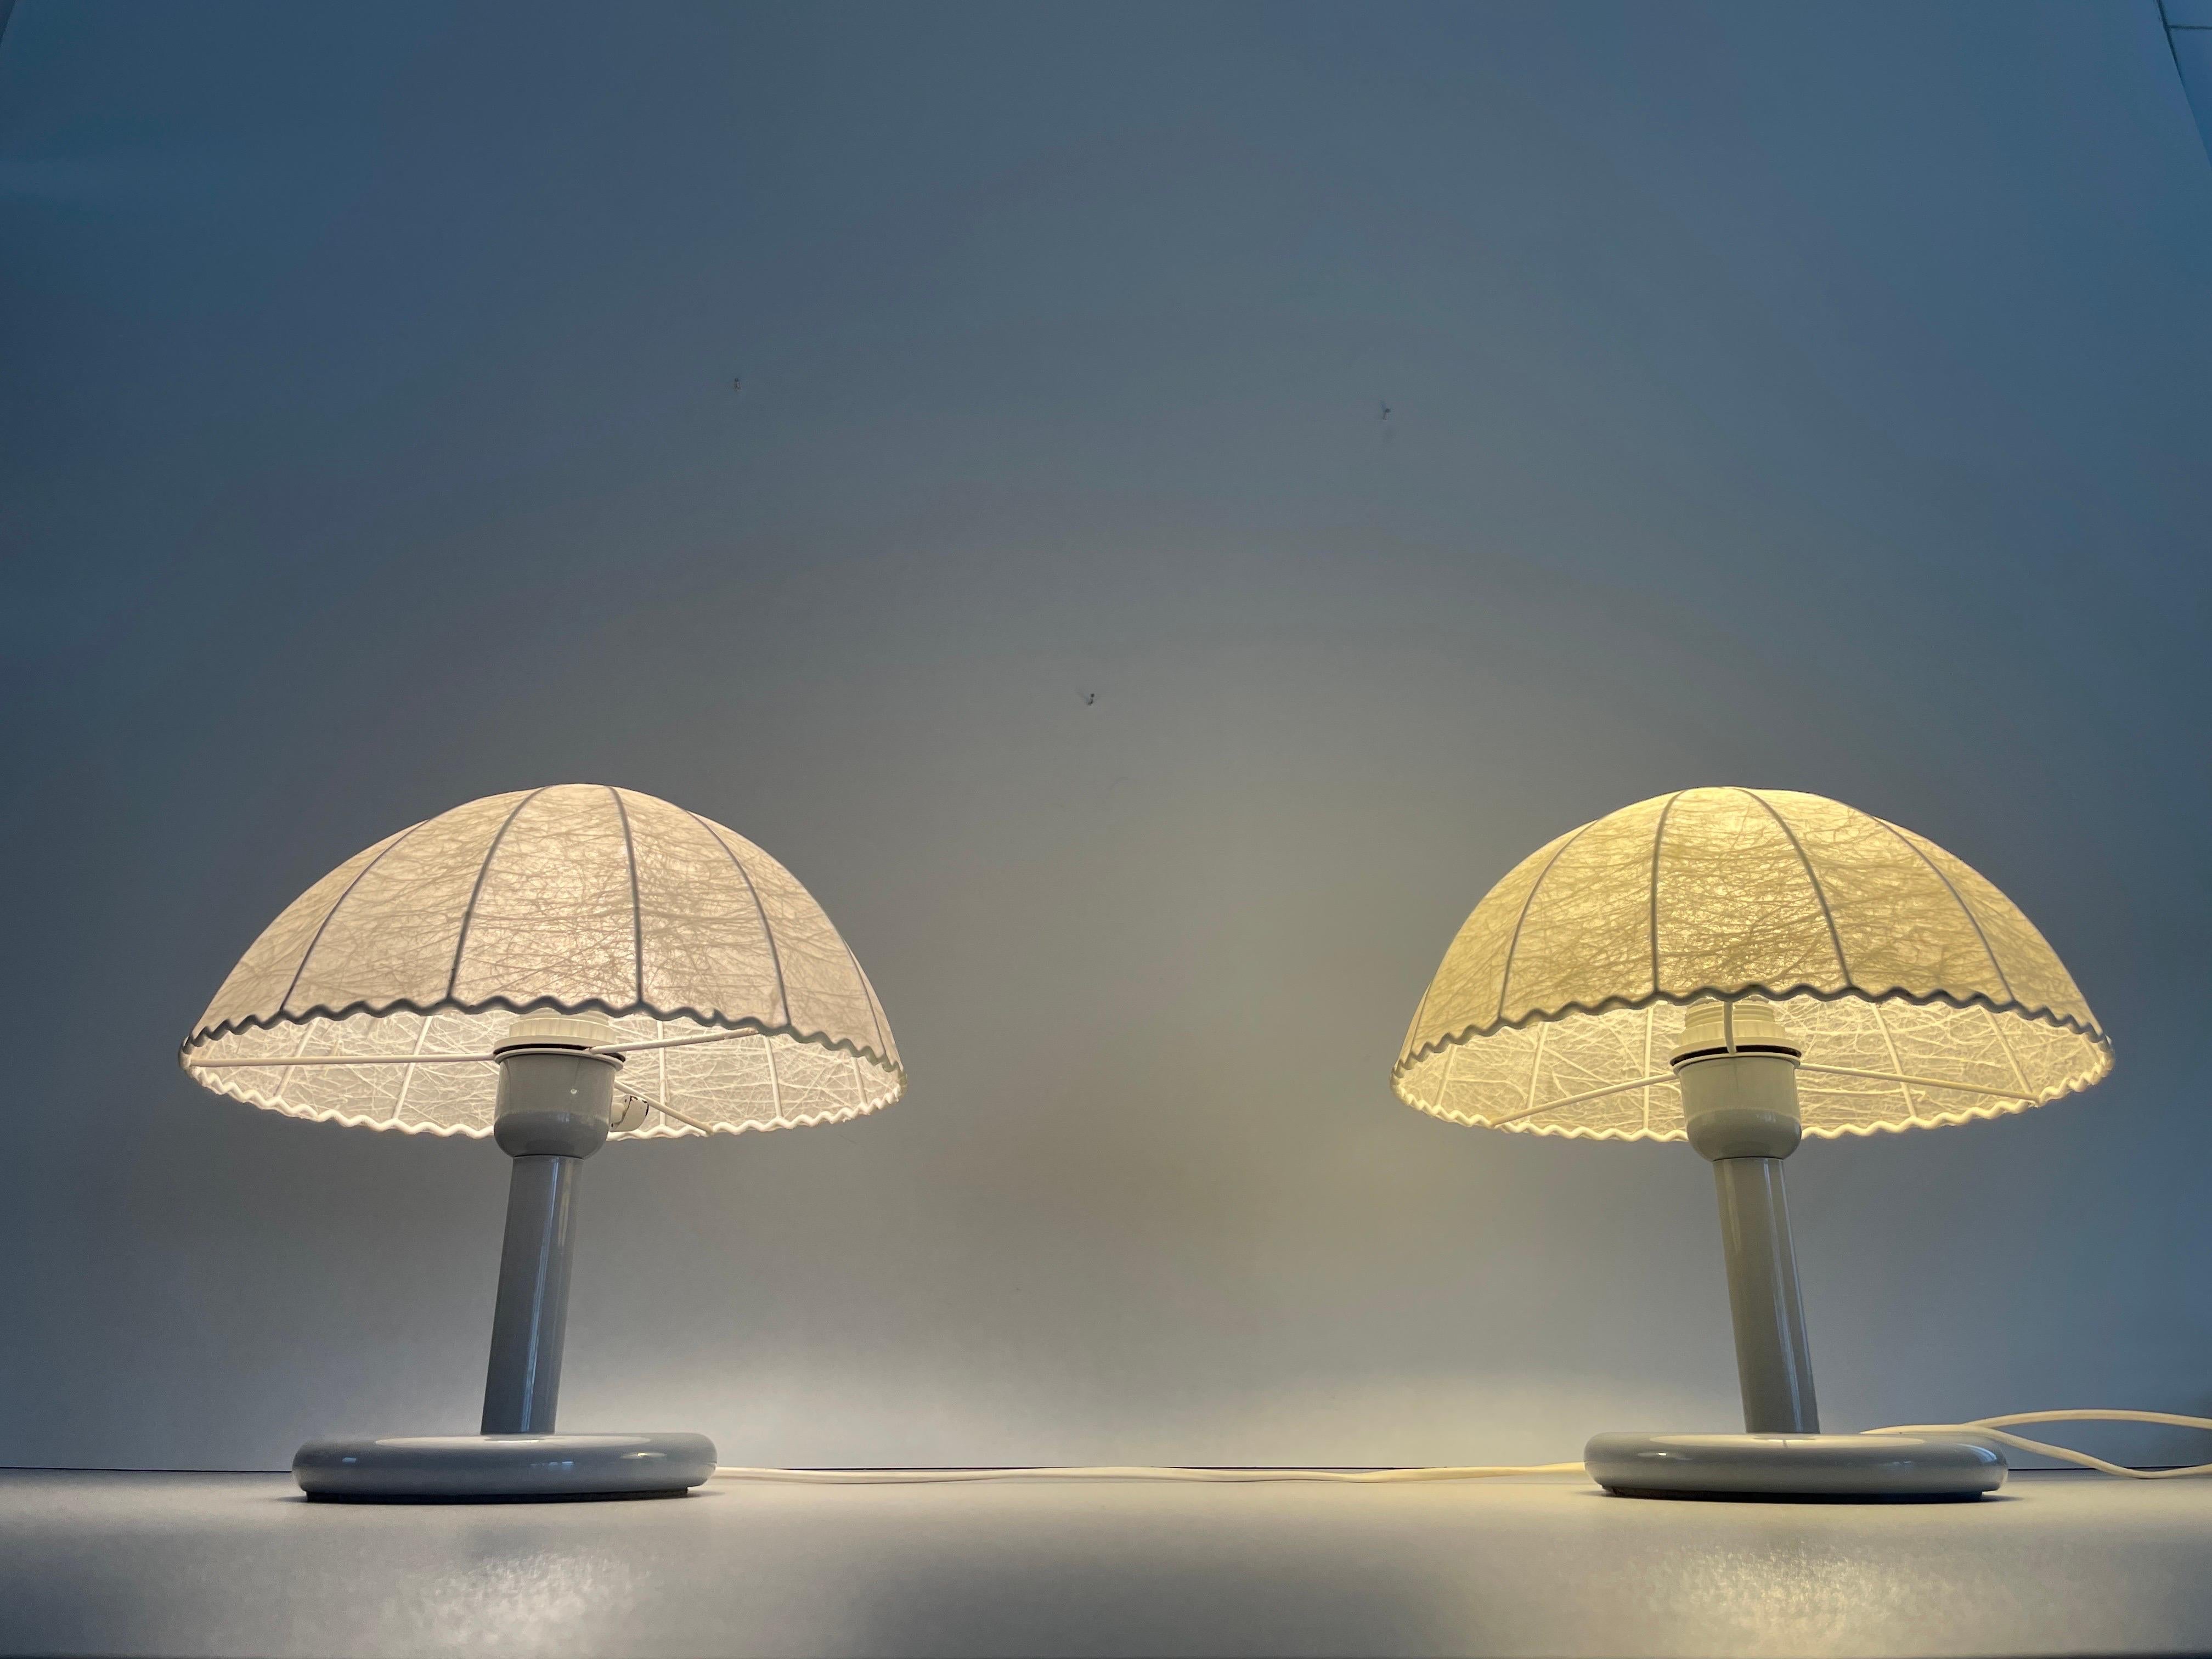 Pair of Cocoon Table Lamps with Grey Metal Base by GOLDKANT, 1960s, Germany For Sale 10